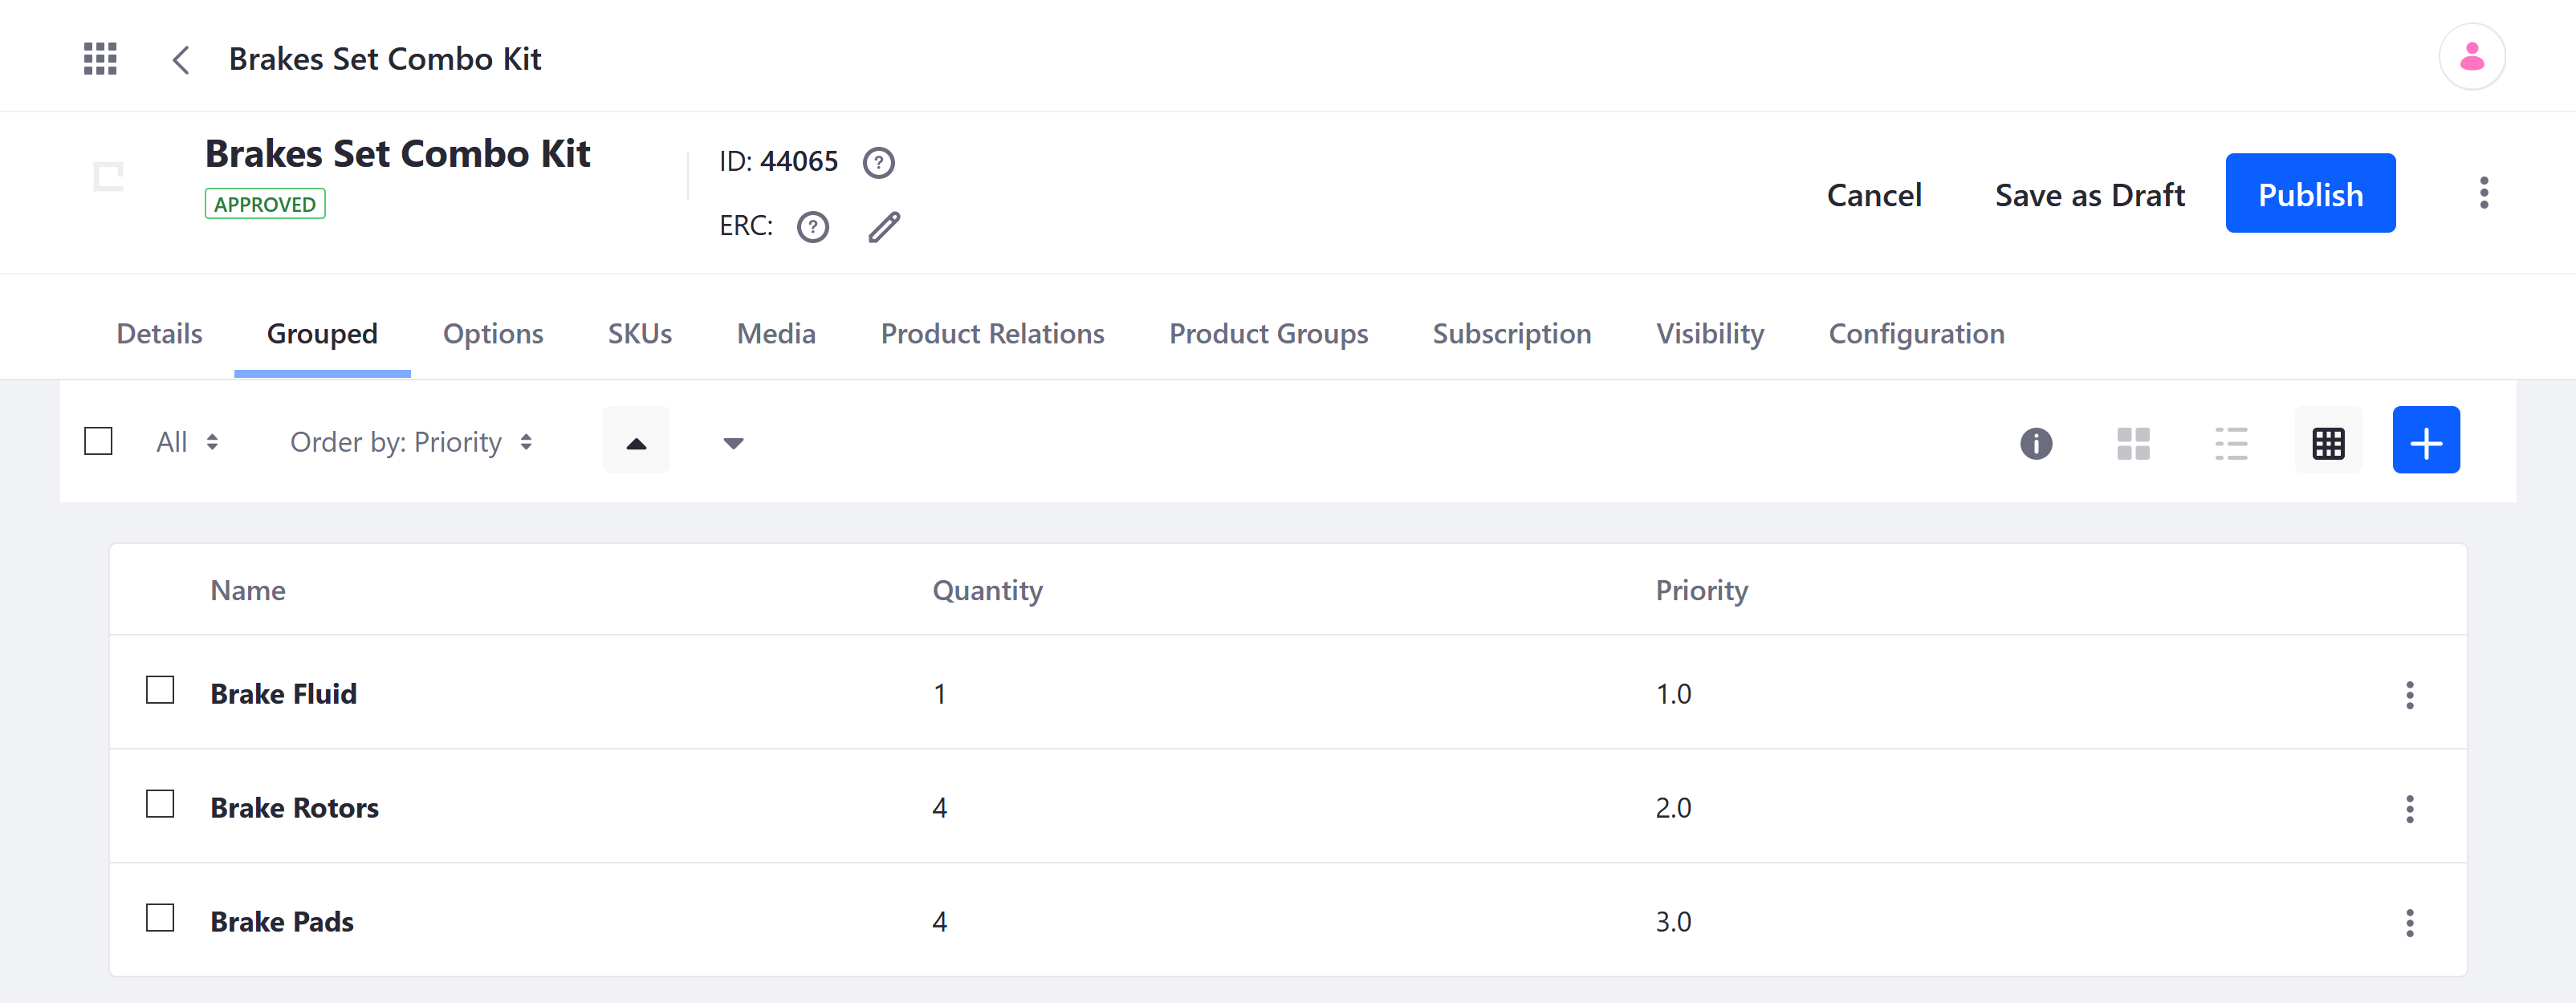 View associated Product entries in the Grouped tab, and determine their quantity and priority.